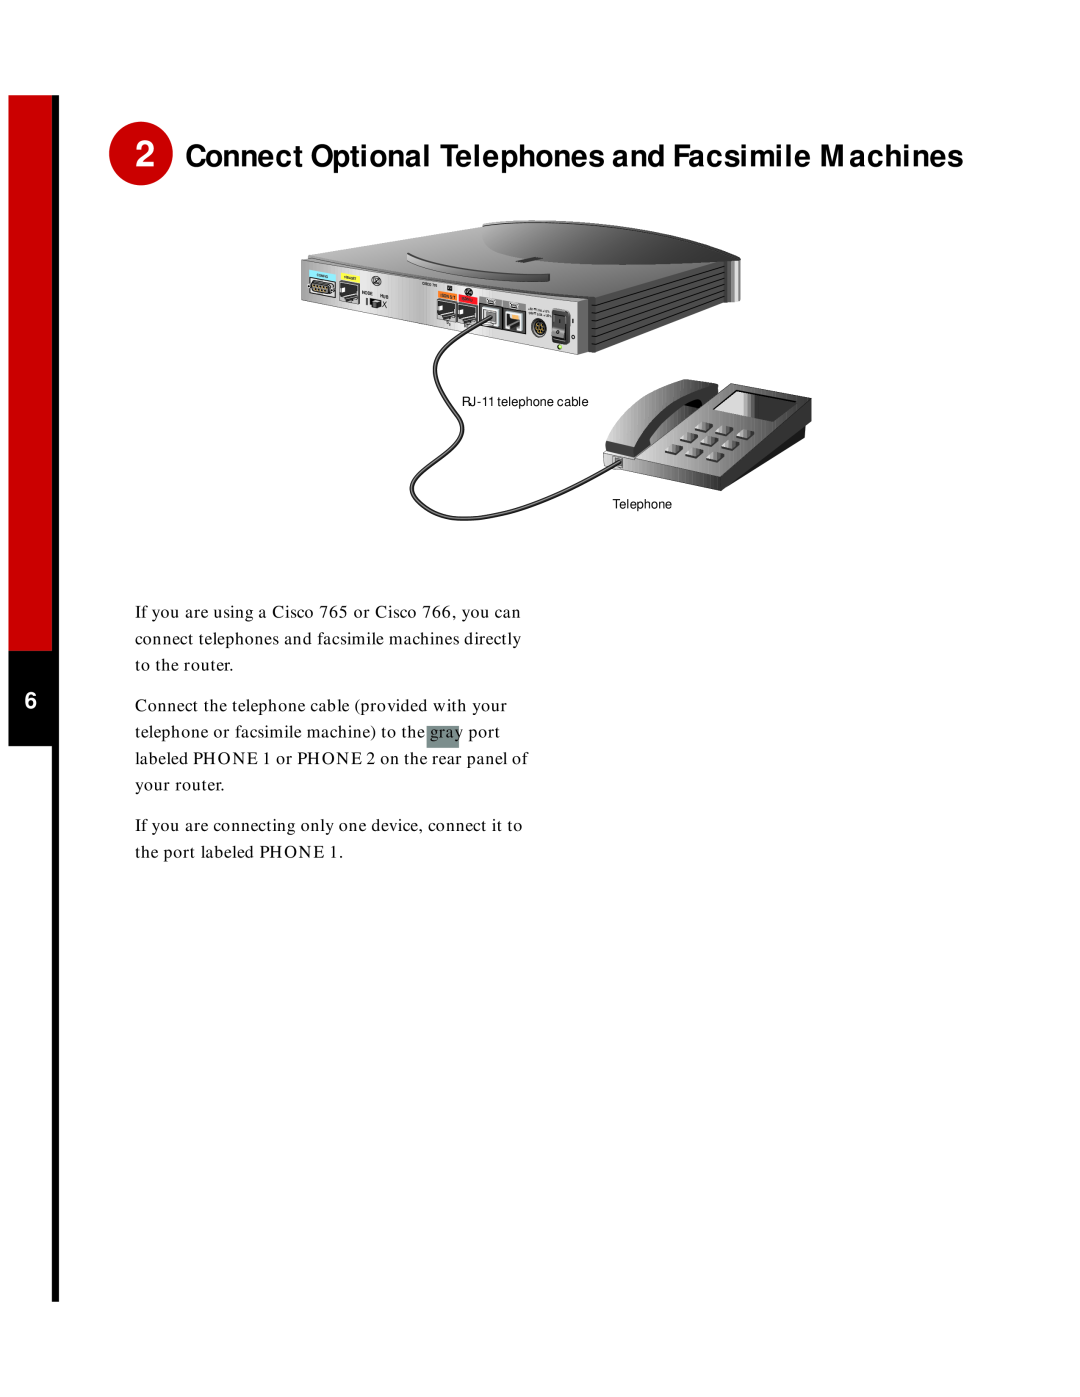 Cisco Systems 760 quick start Connect Optional Telephones and Facsimile Machines, RJ-11 telephone cable 